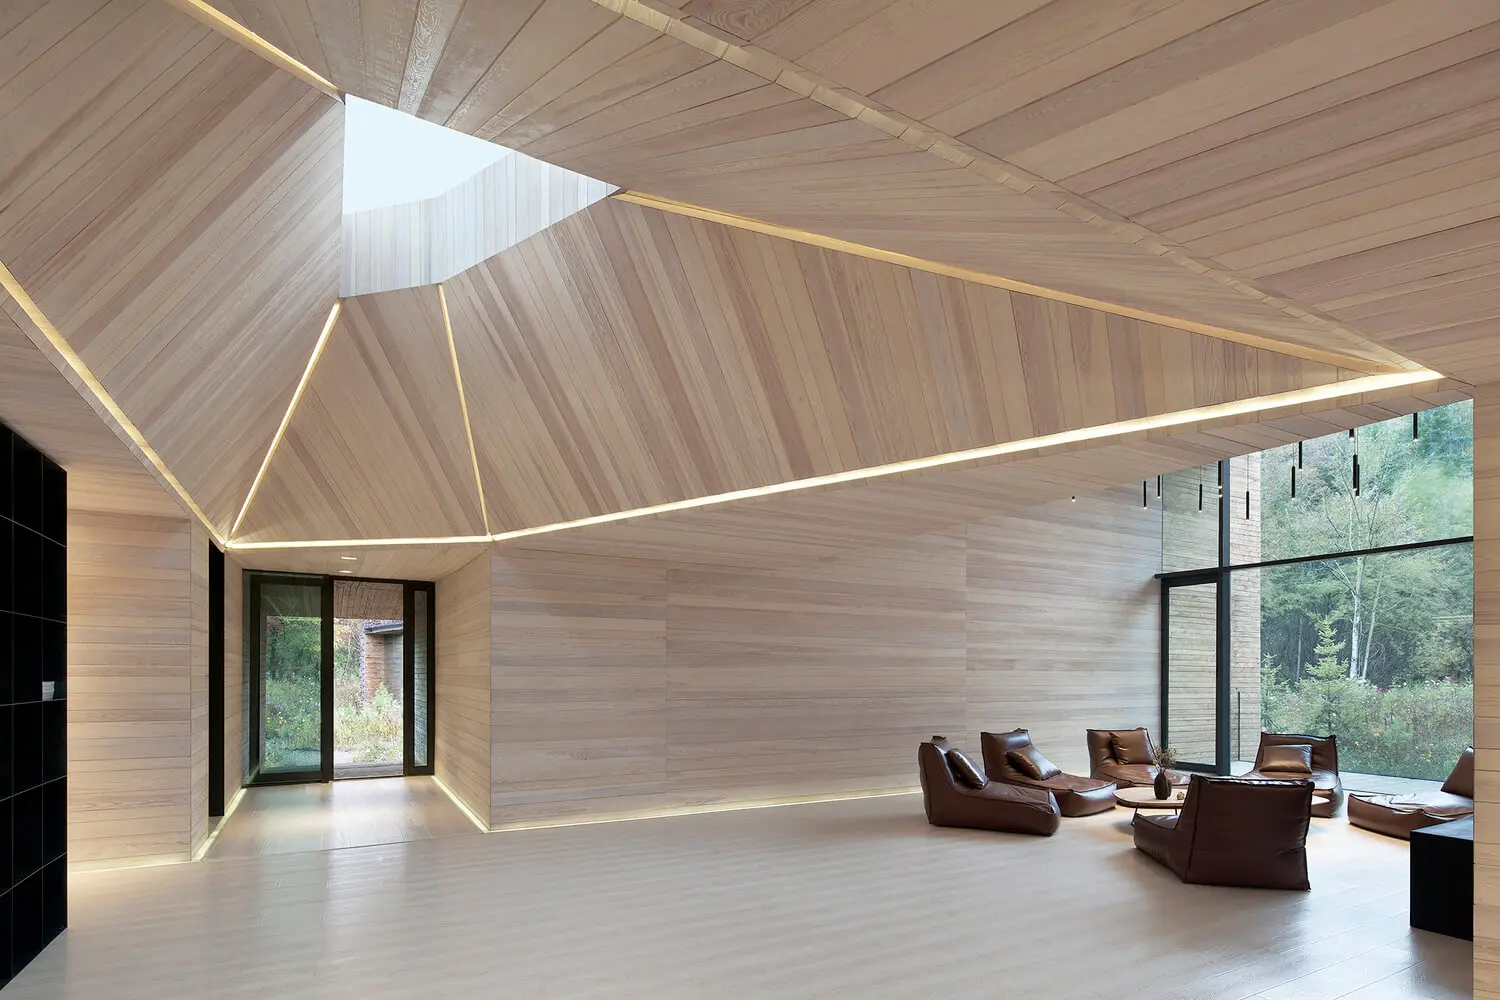 Haphazard and edgy cuts in the ceiling by Origin Architects